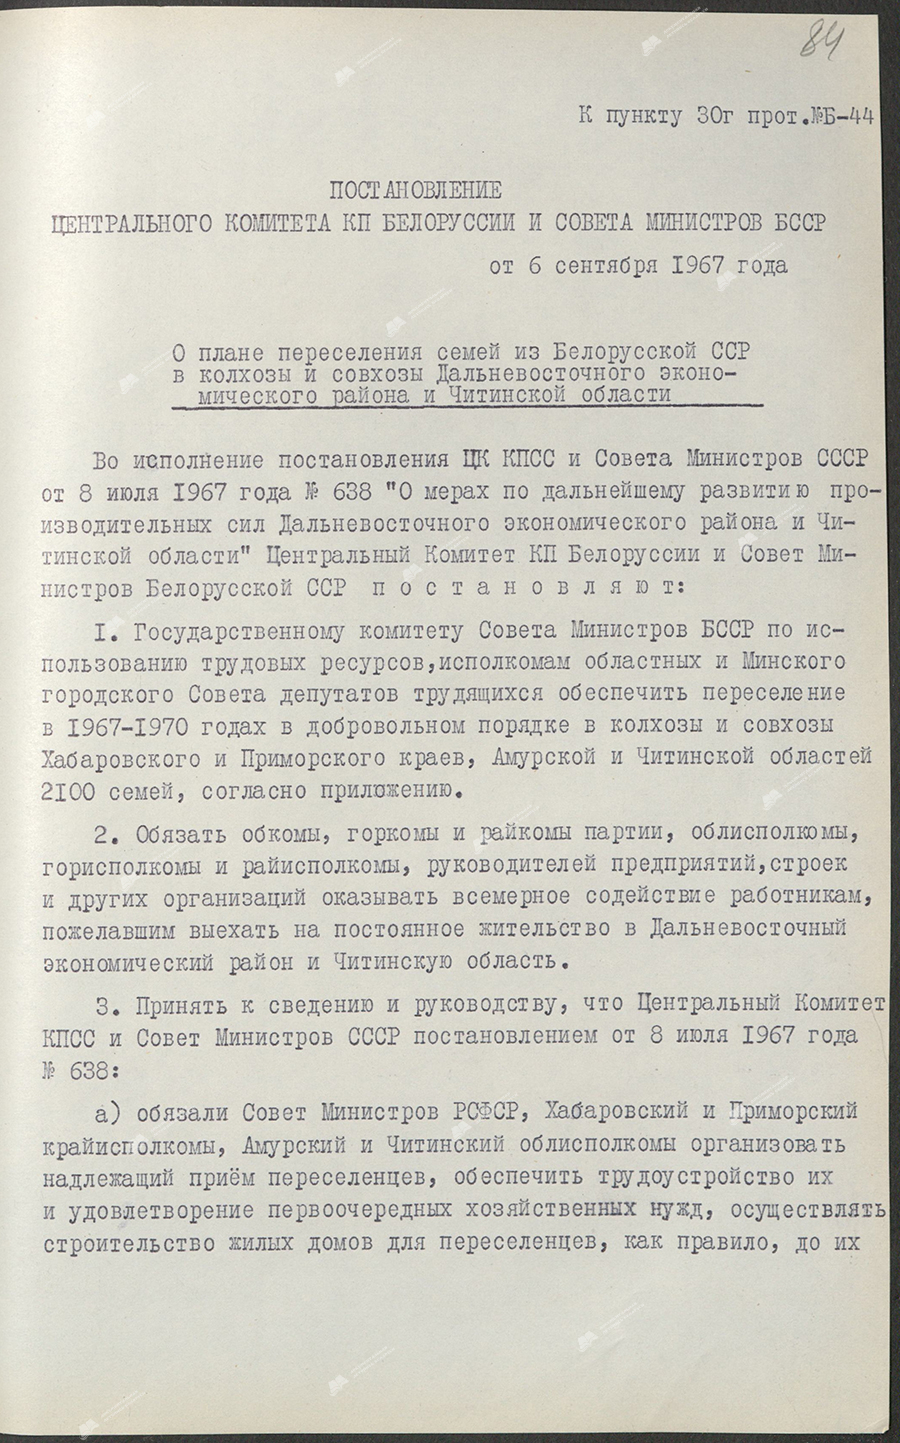 Resolution of the Central Committee of the Communist Party of Belarus and the Council of Ministers of the BSSR «On the plan for the resettlement of families from the BSSR to collective farms and state farms of the Far Eastern economic region and the Chita region»-стр. 0